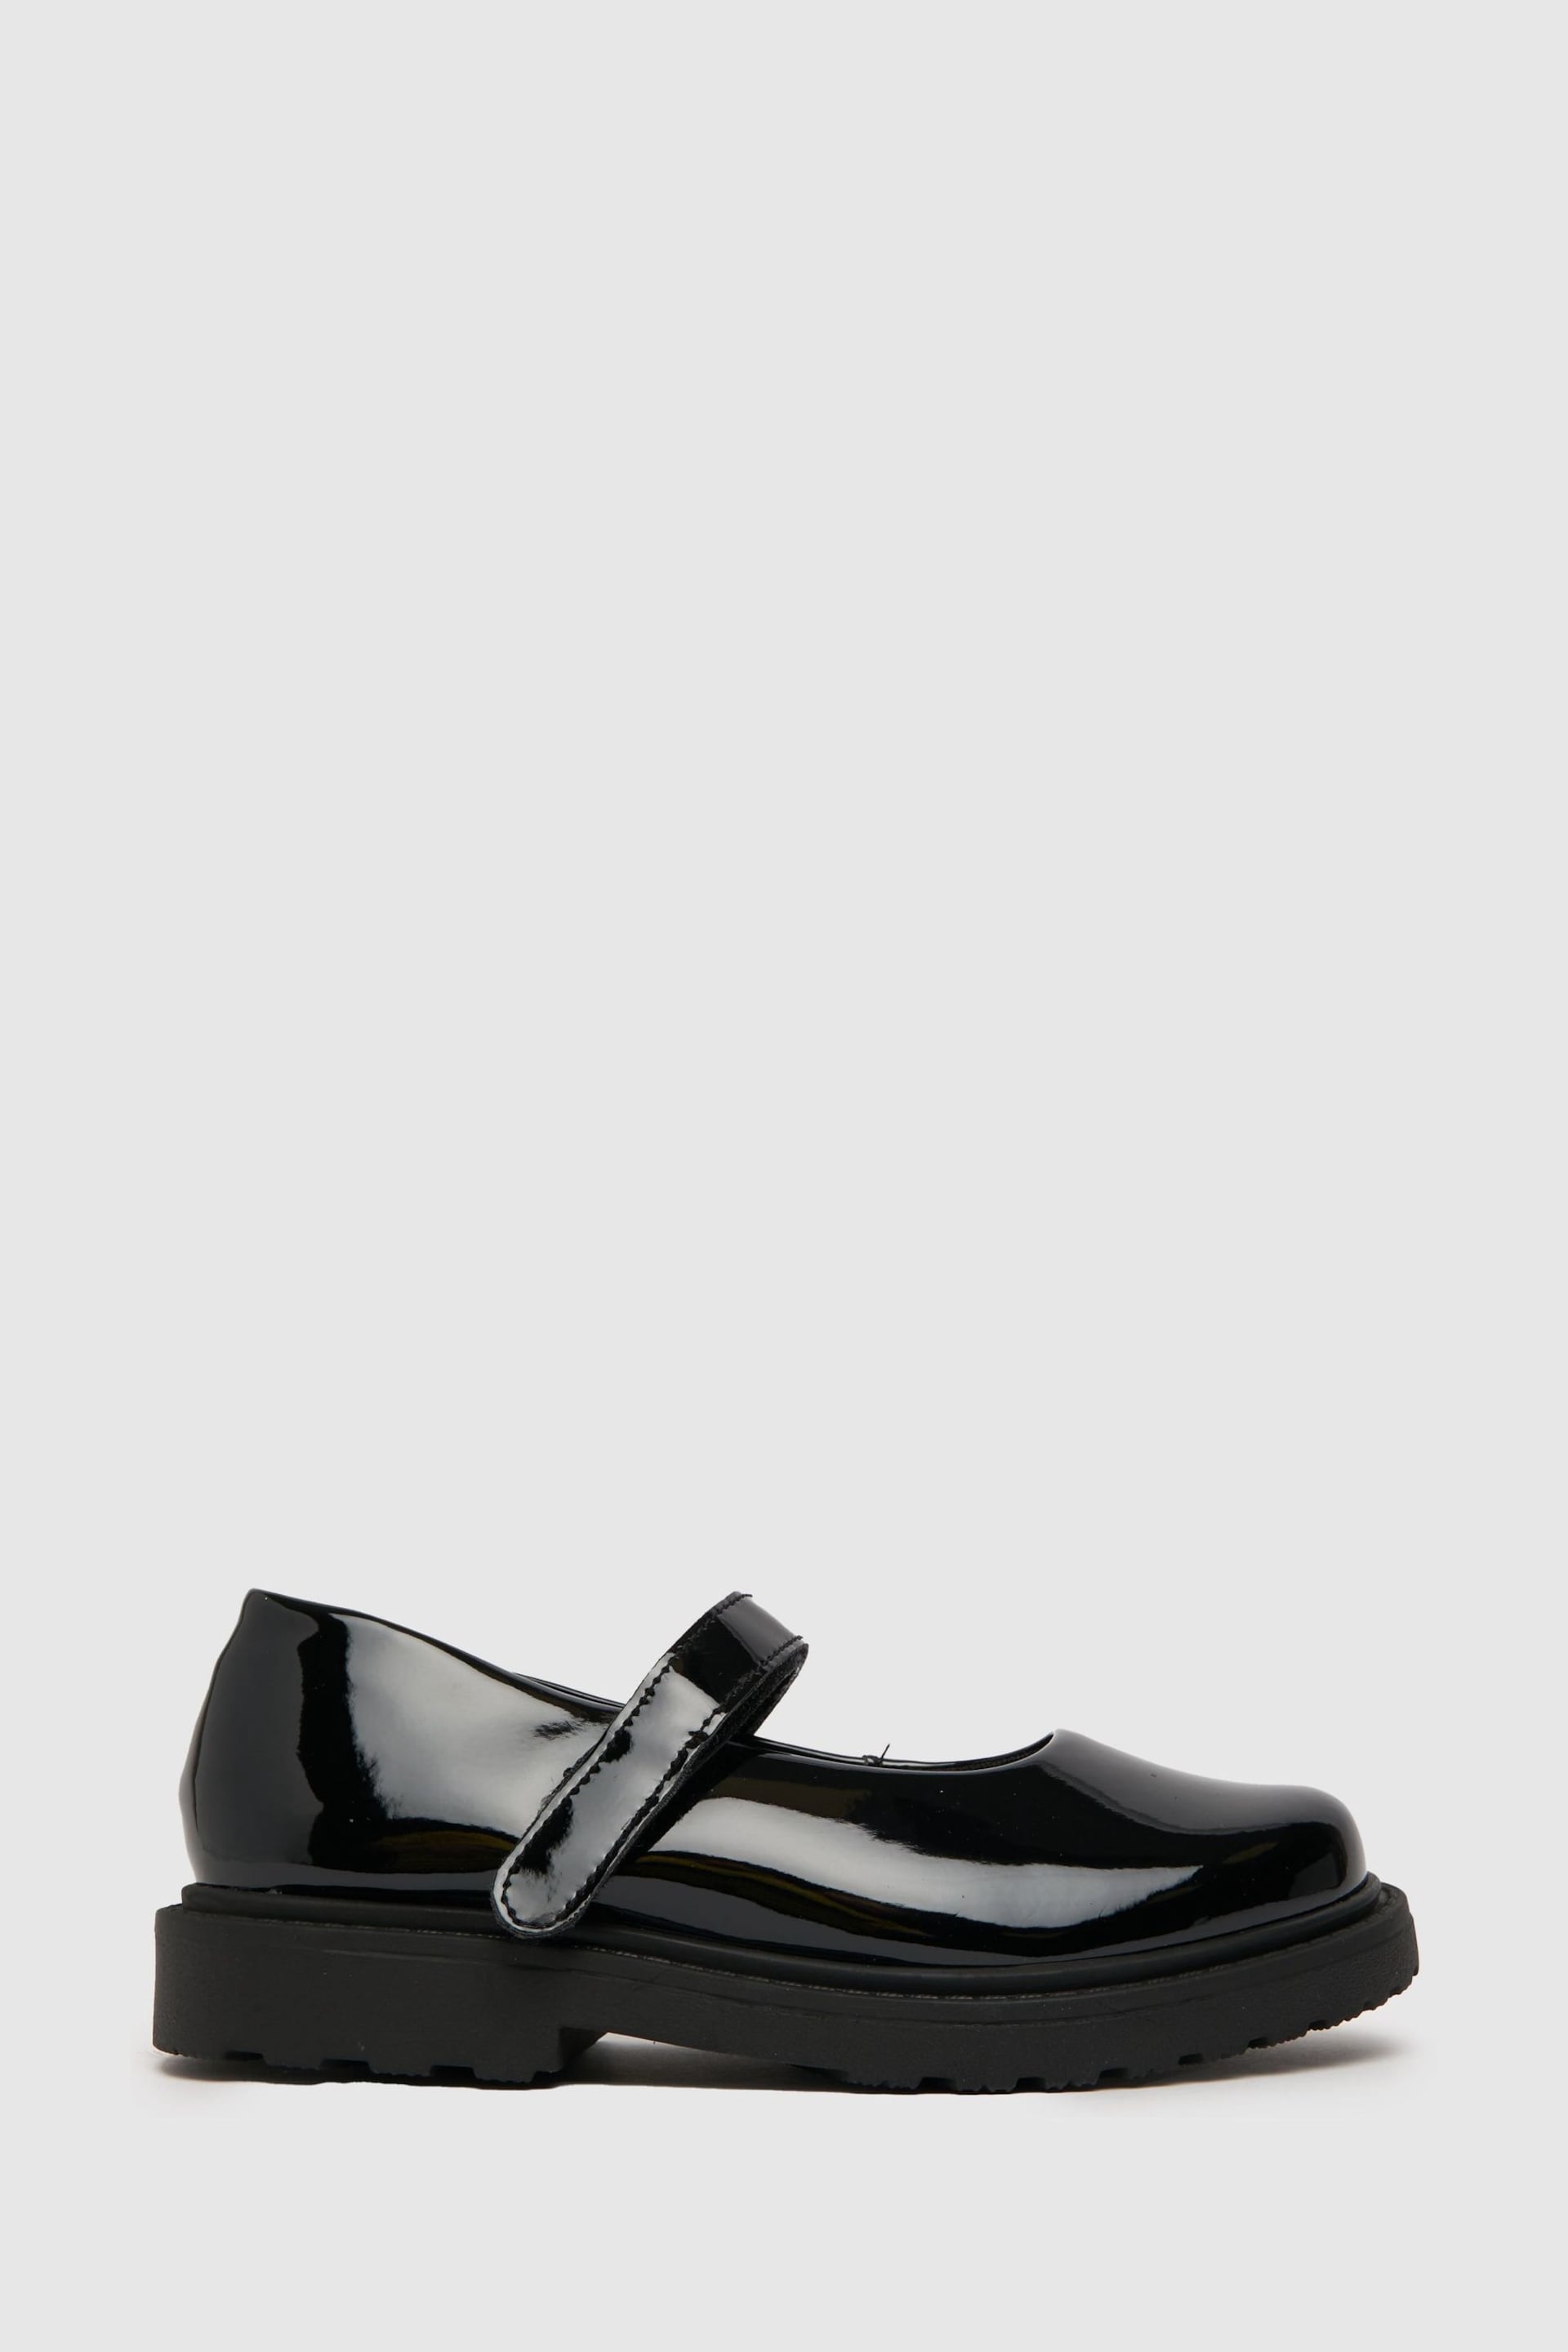 Schuh Junior Black Lagoon Mary Jane Shoes - Image 1 of 5